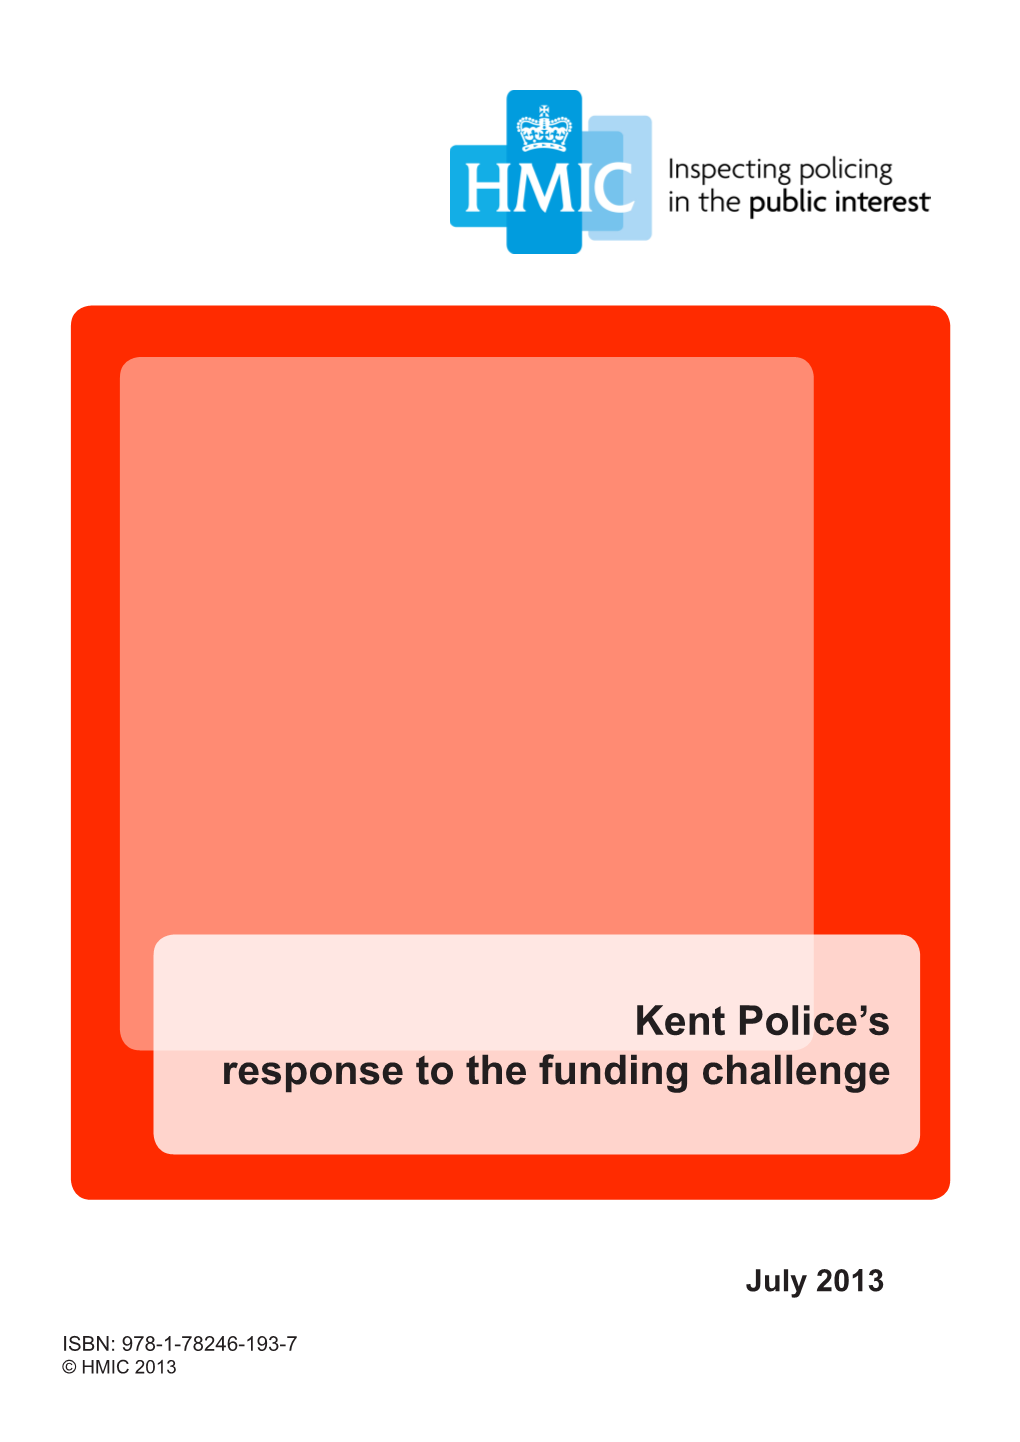 Kent Police's Response to the Funding Challenge